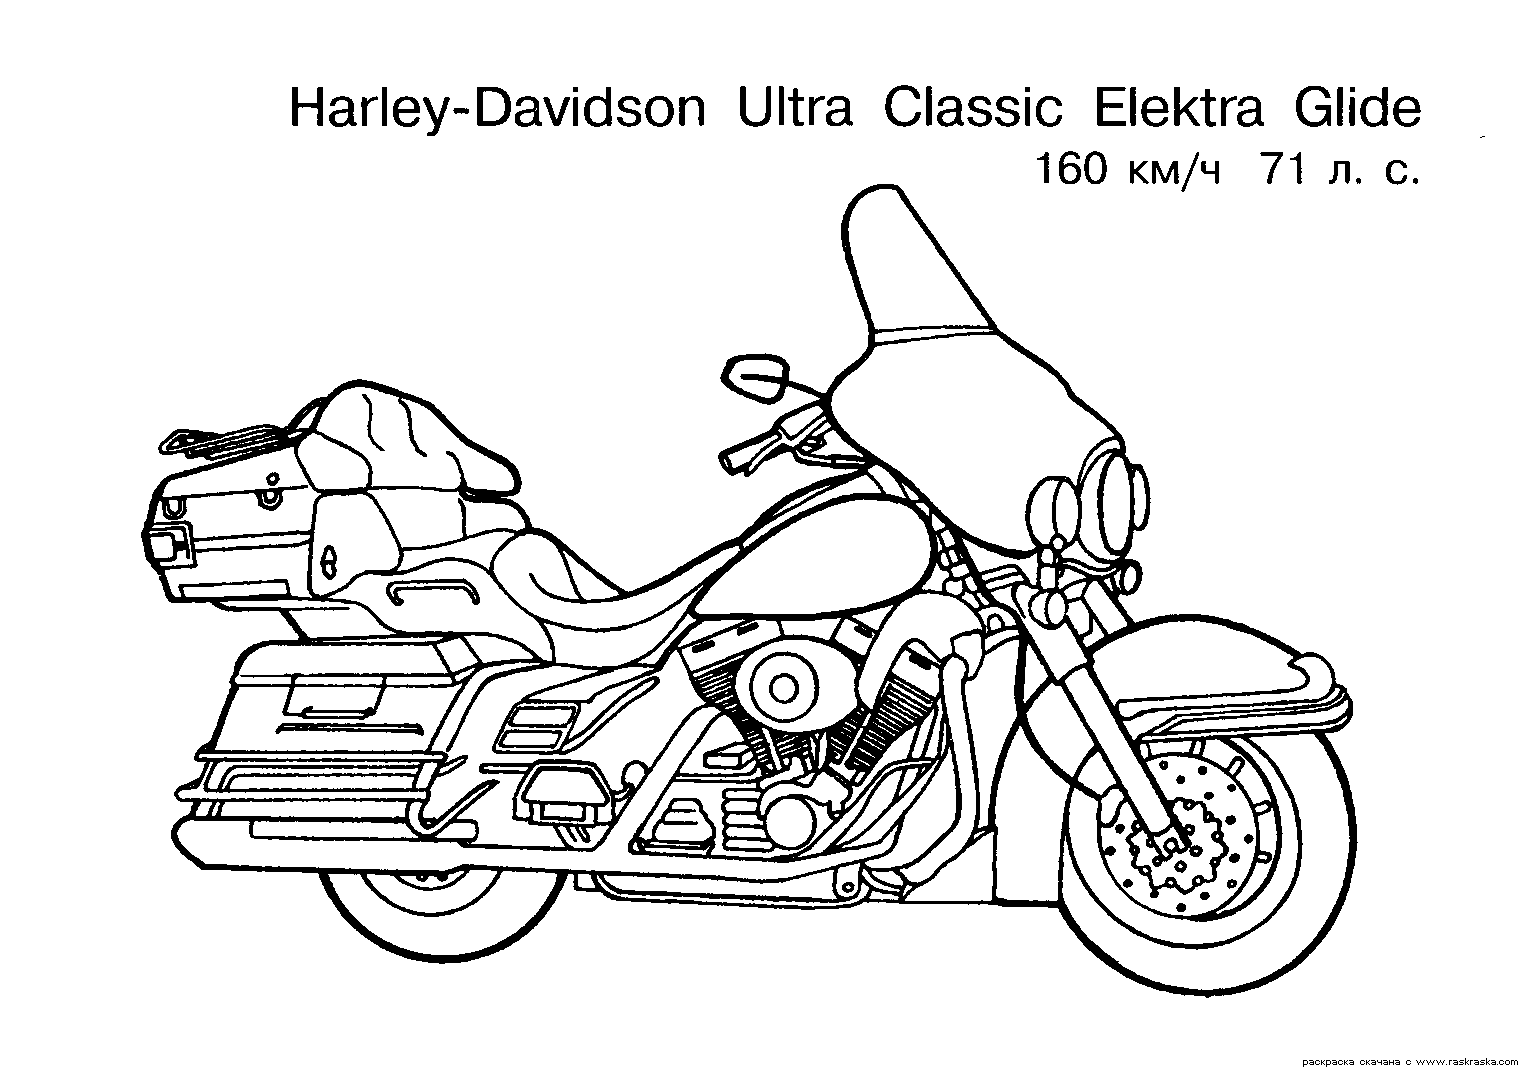  Free Motorcycle coloring page, letscoloringpages.com, Harley Davidson Ultra Classic